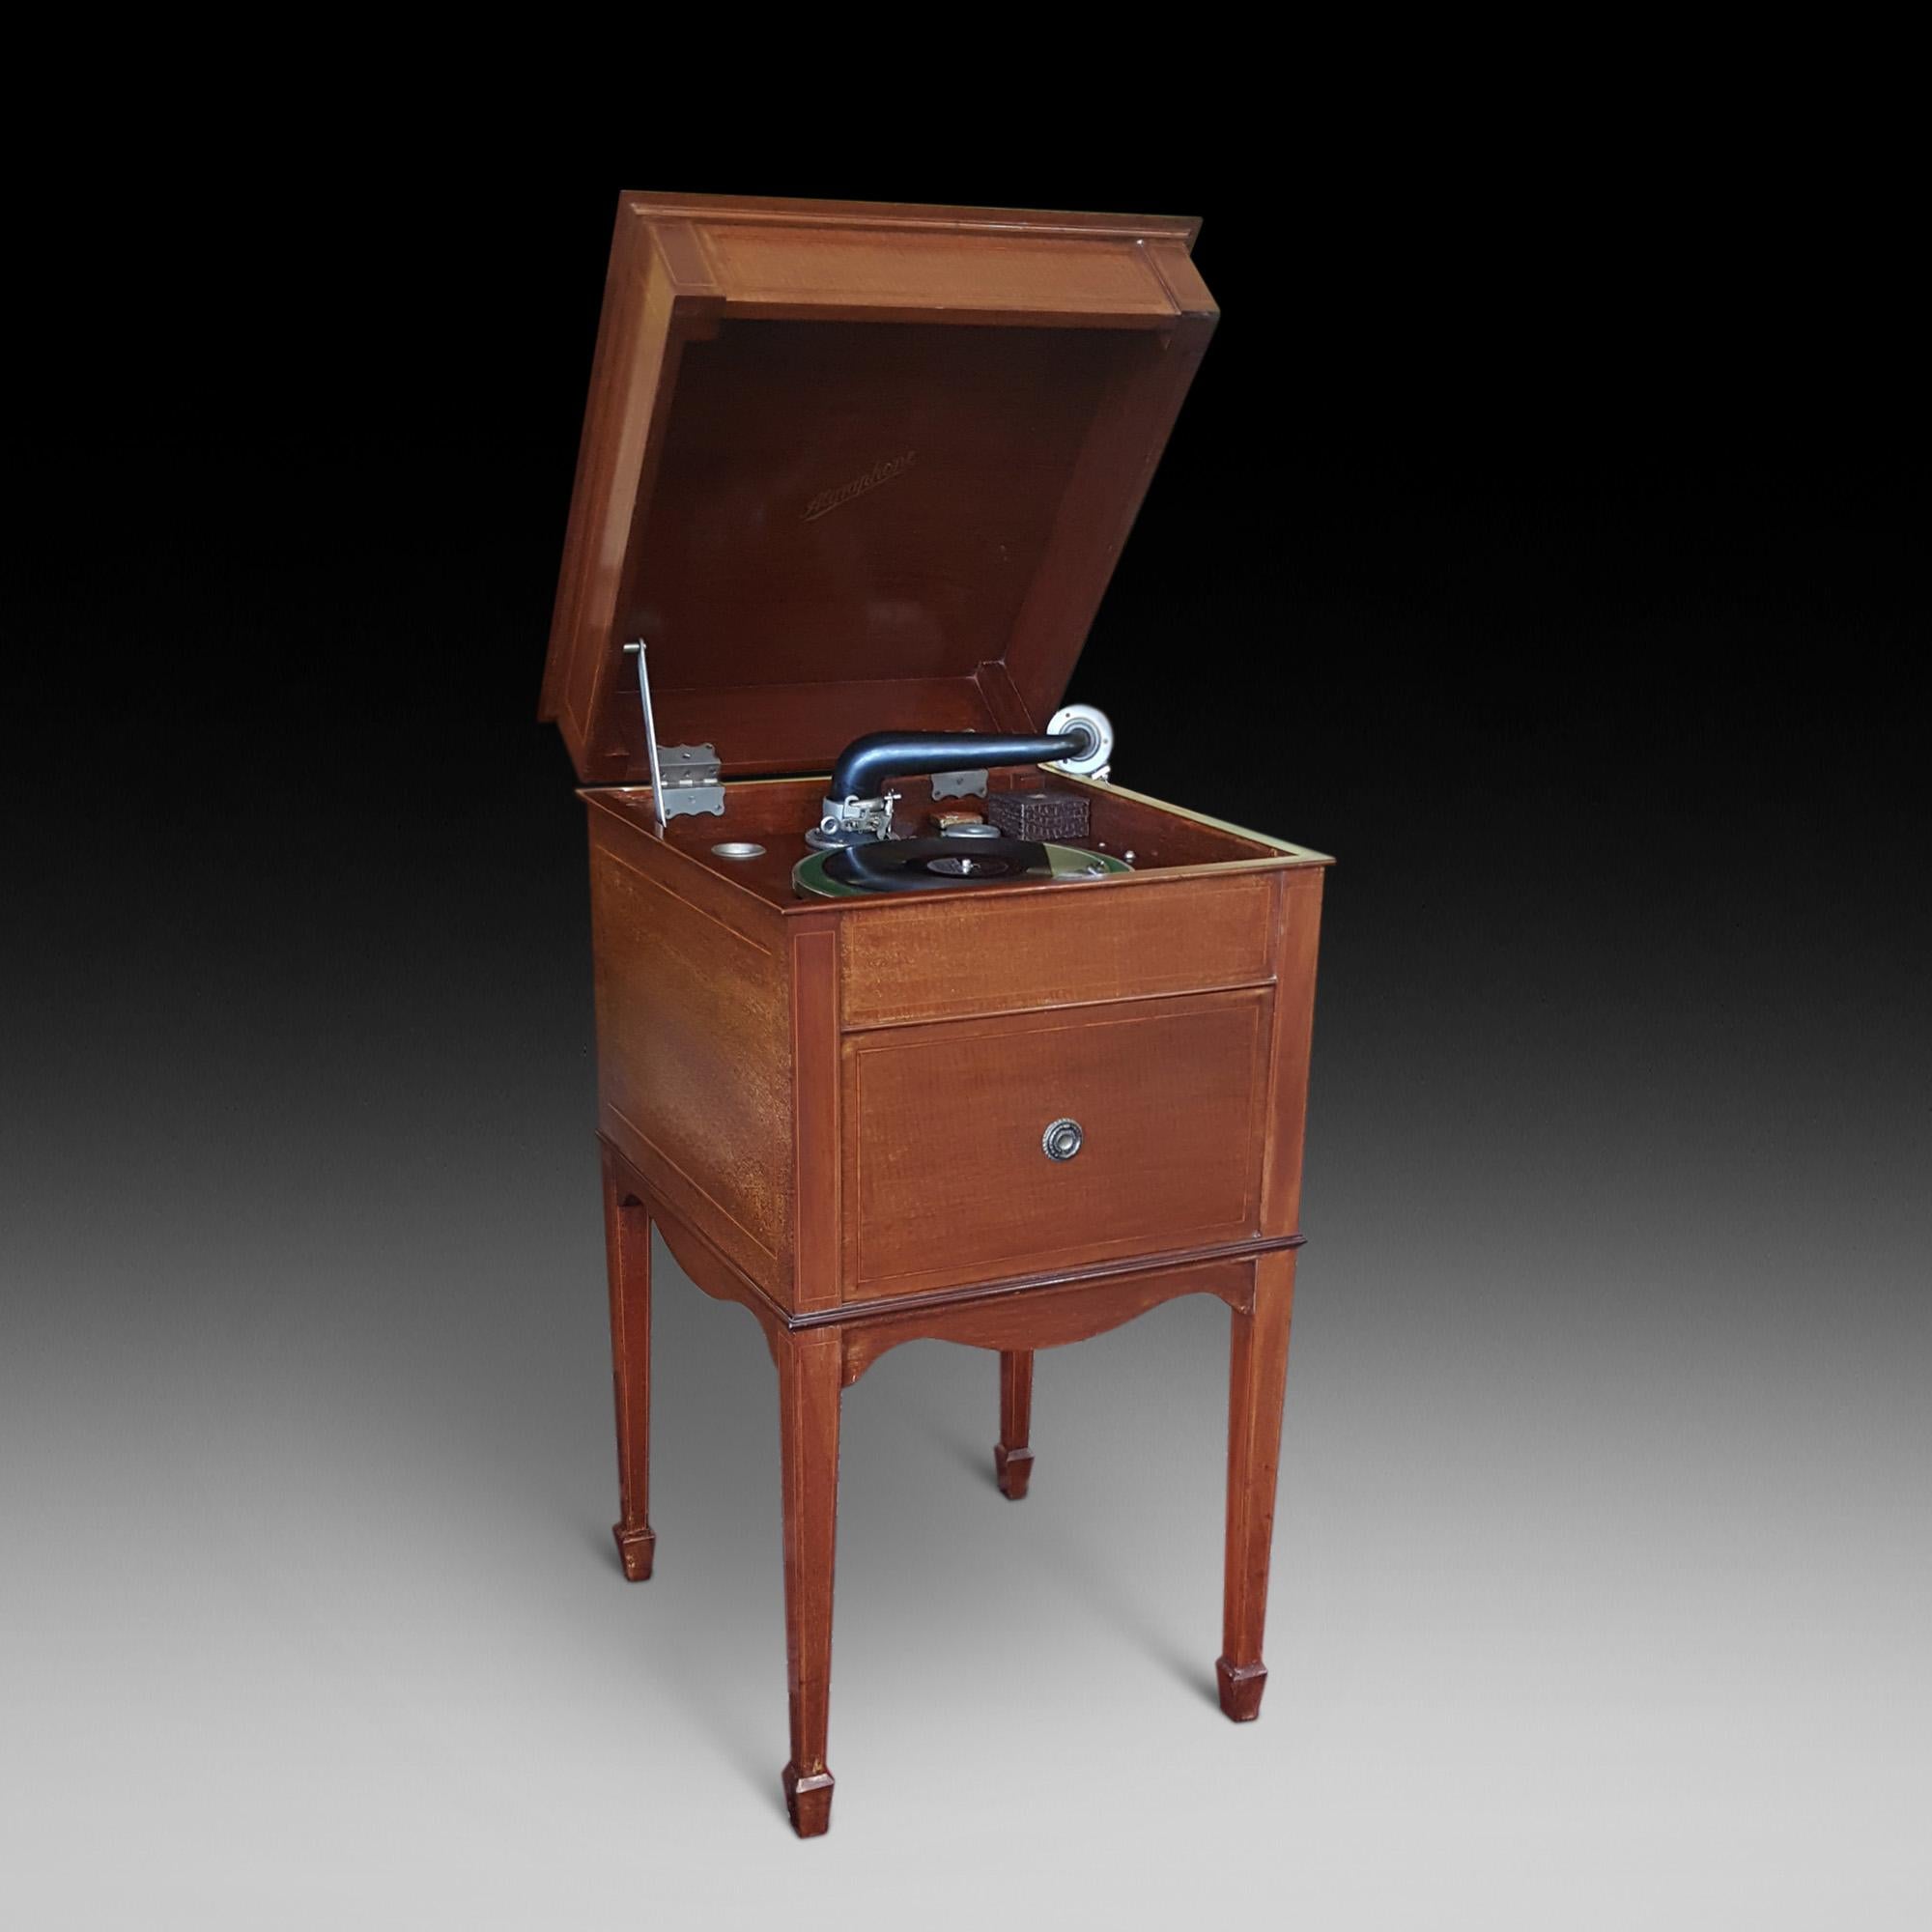 Grahams Gramophone in Sheraton style mahogany cabinet, from the Algraphone Saon, Saville Row, London - a club where the latest 78's were played and also the best gramophones were showcased - the Graham's were the best - selling for double the